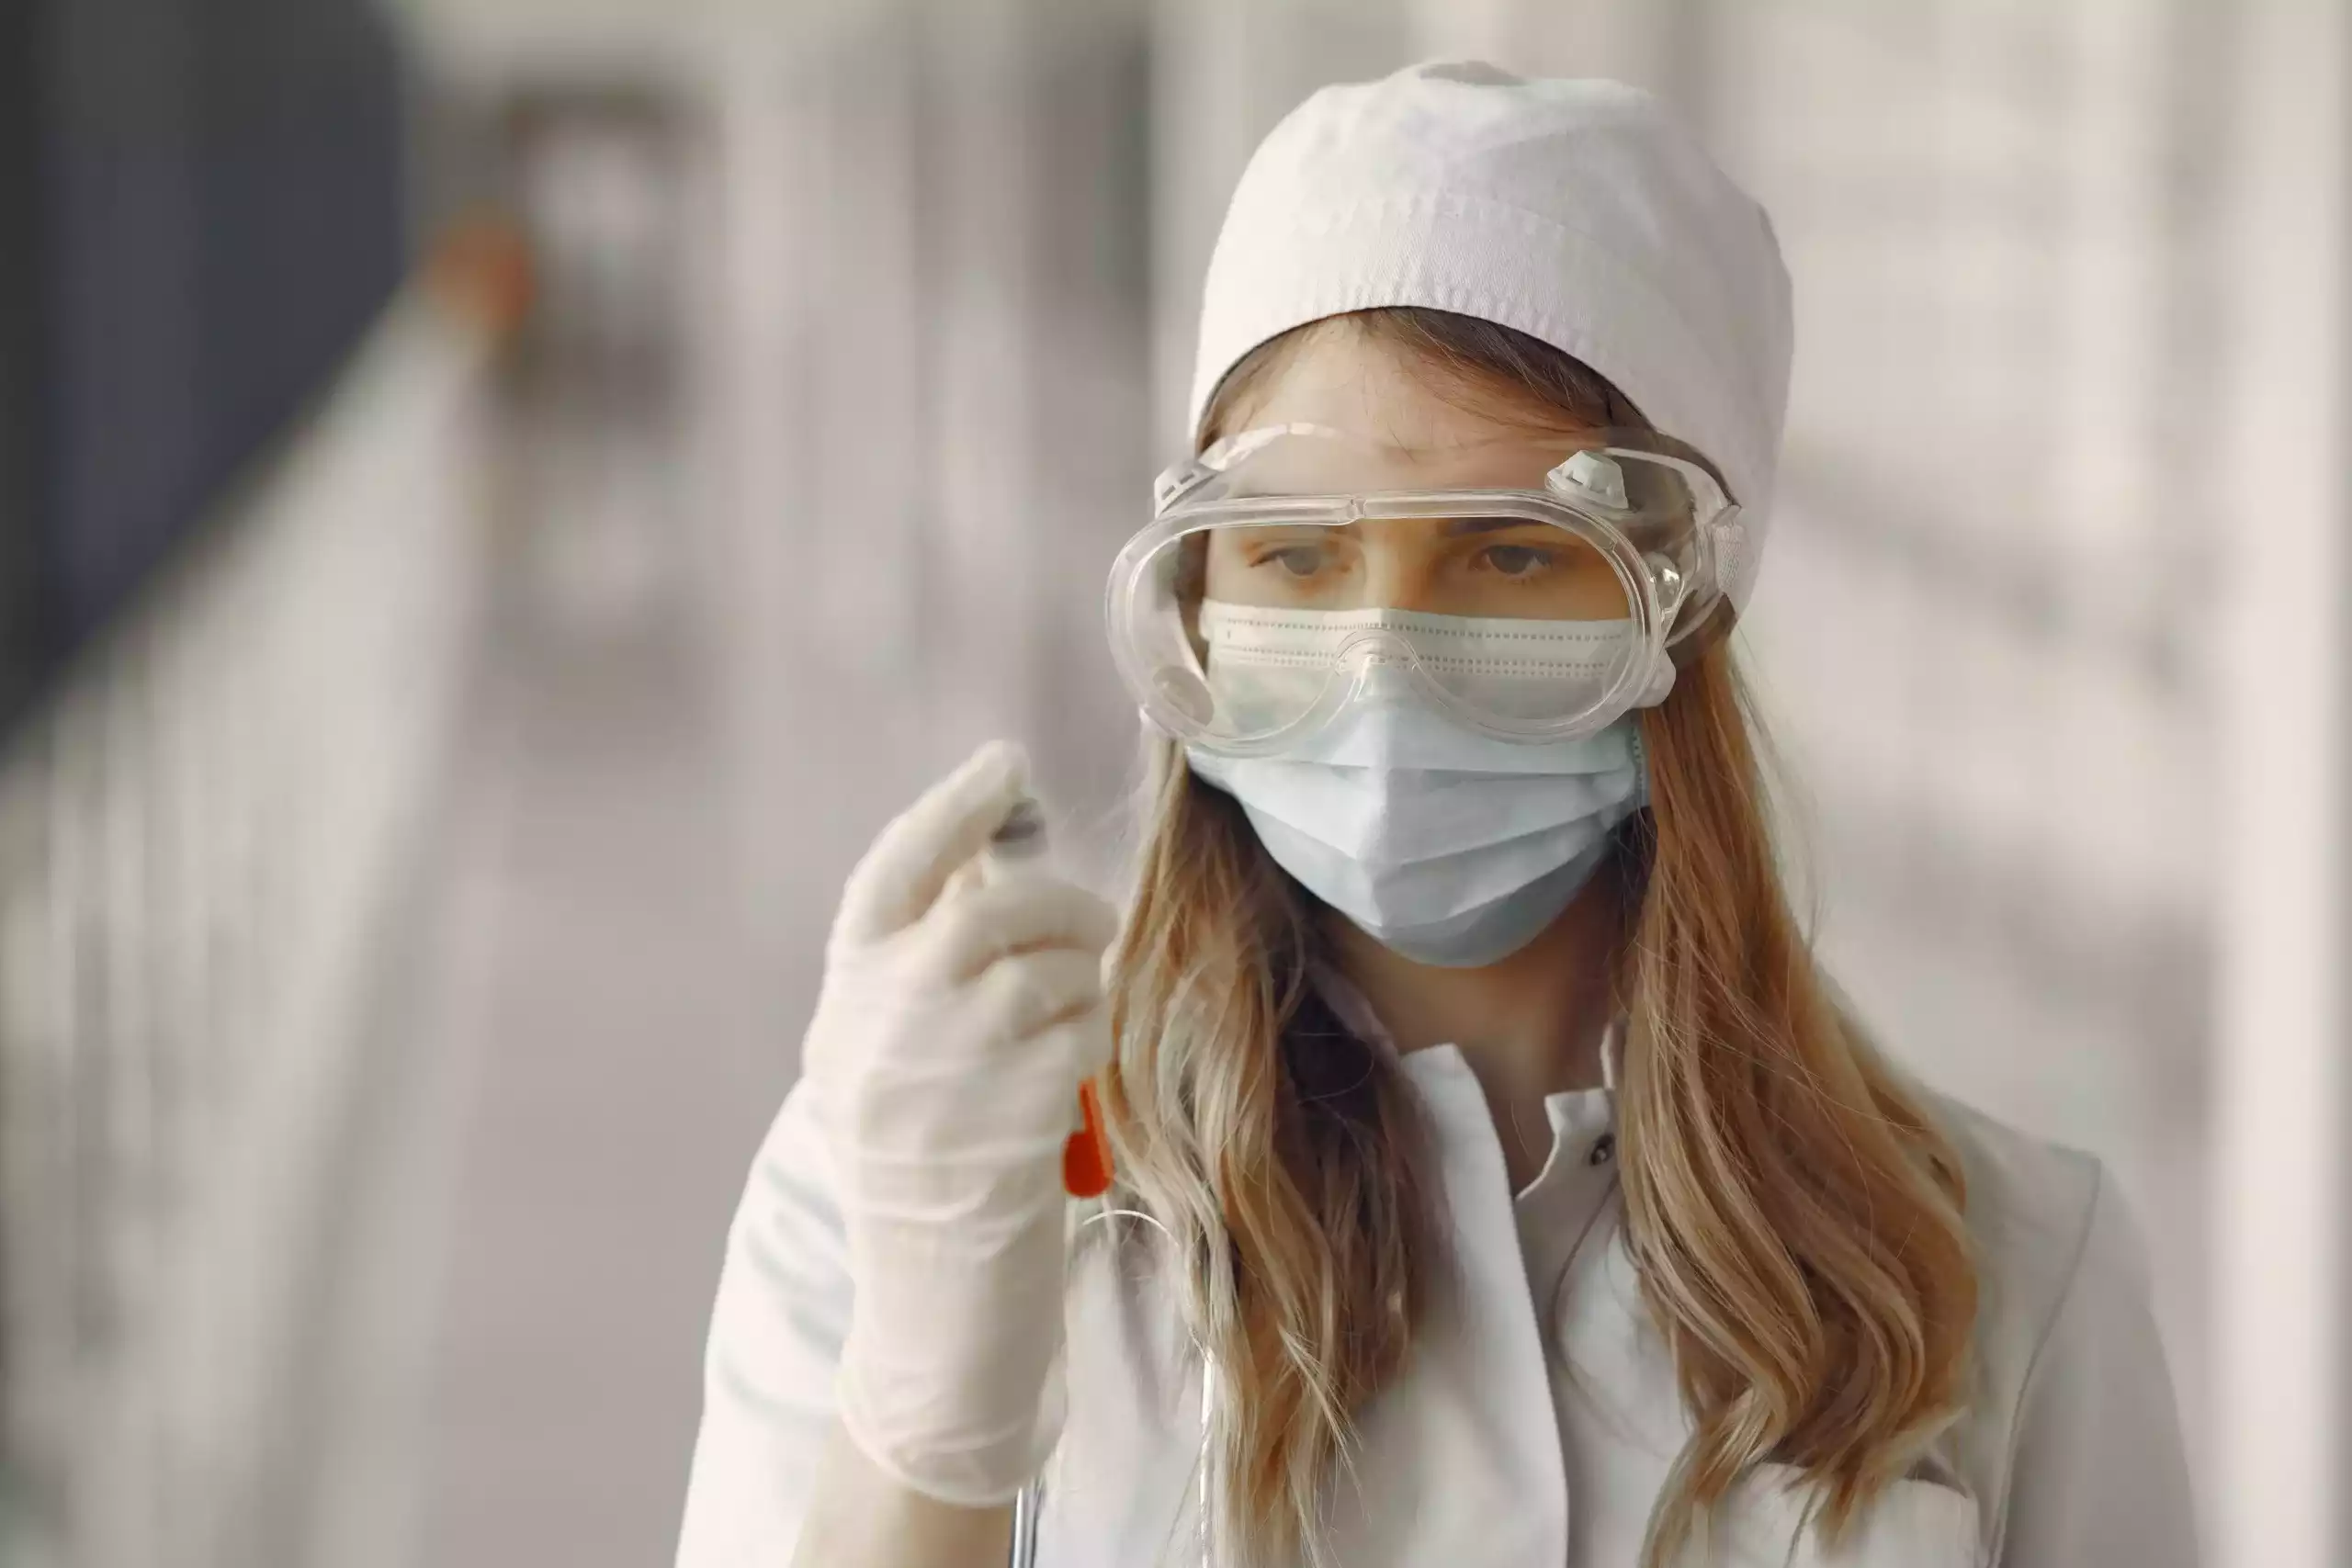 A woman scientist wearing safety goggles while performing consumer product safety testing